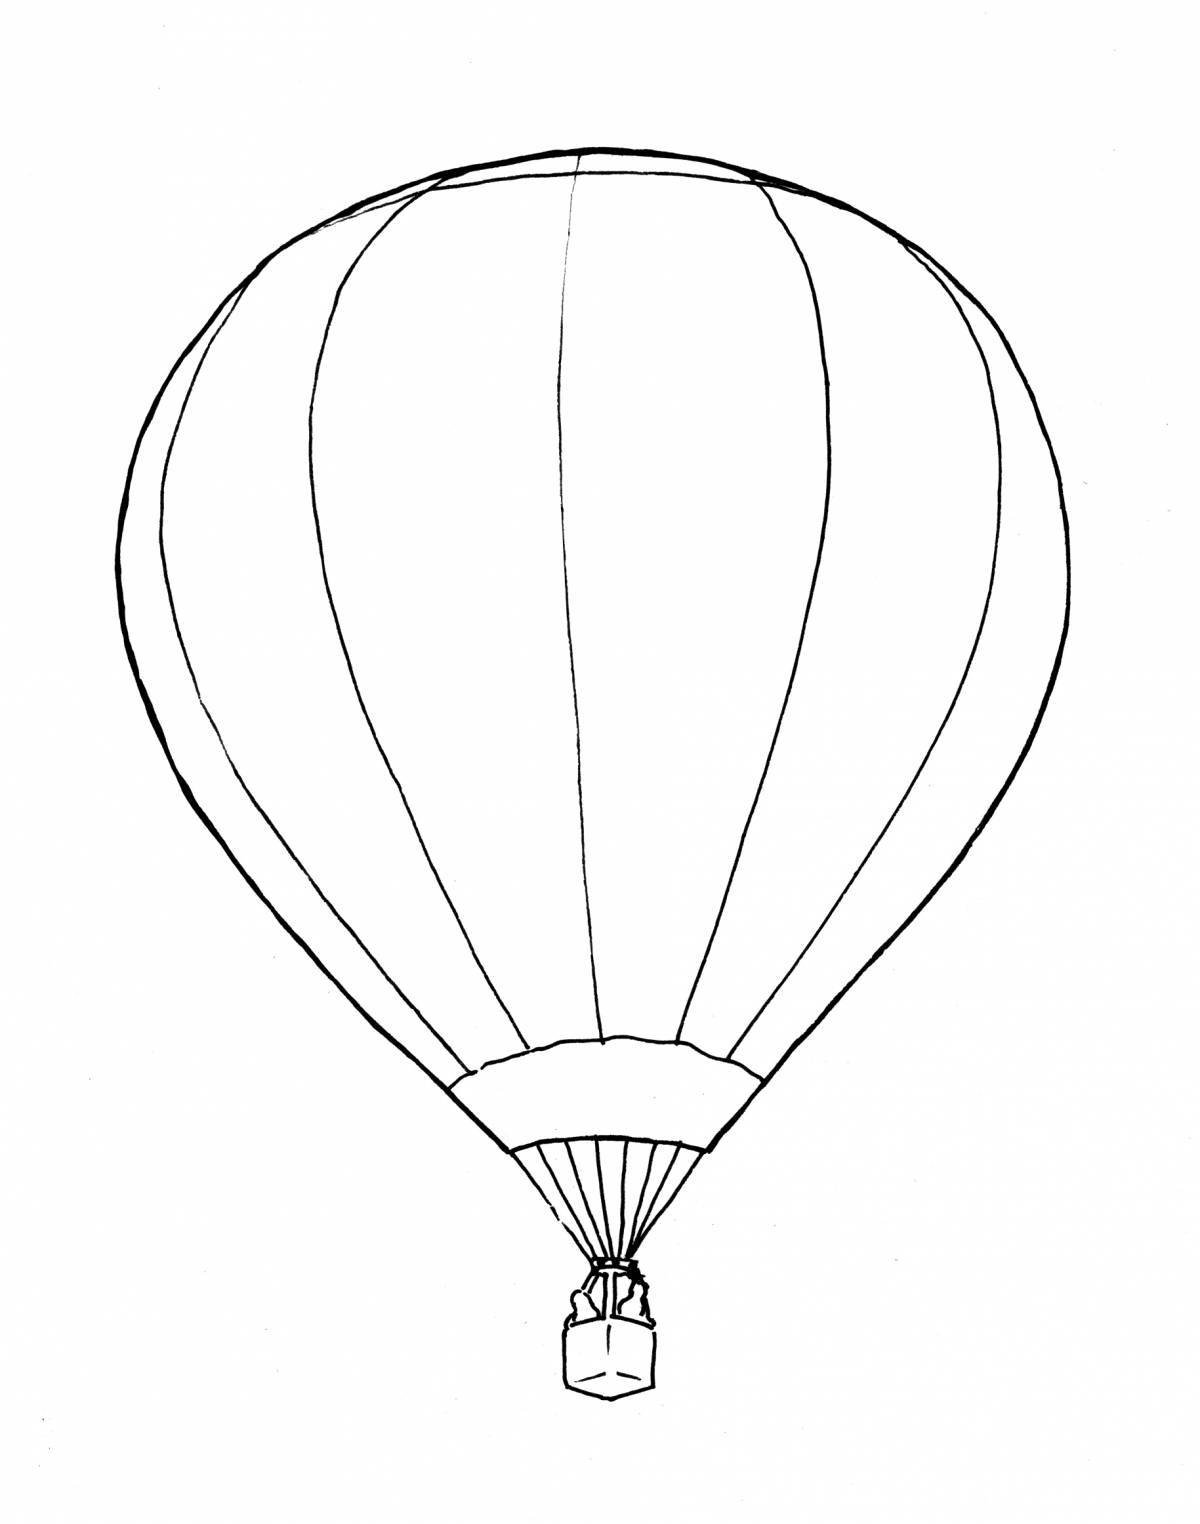 Great balloon coloring page